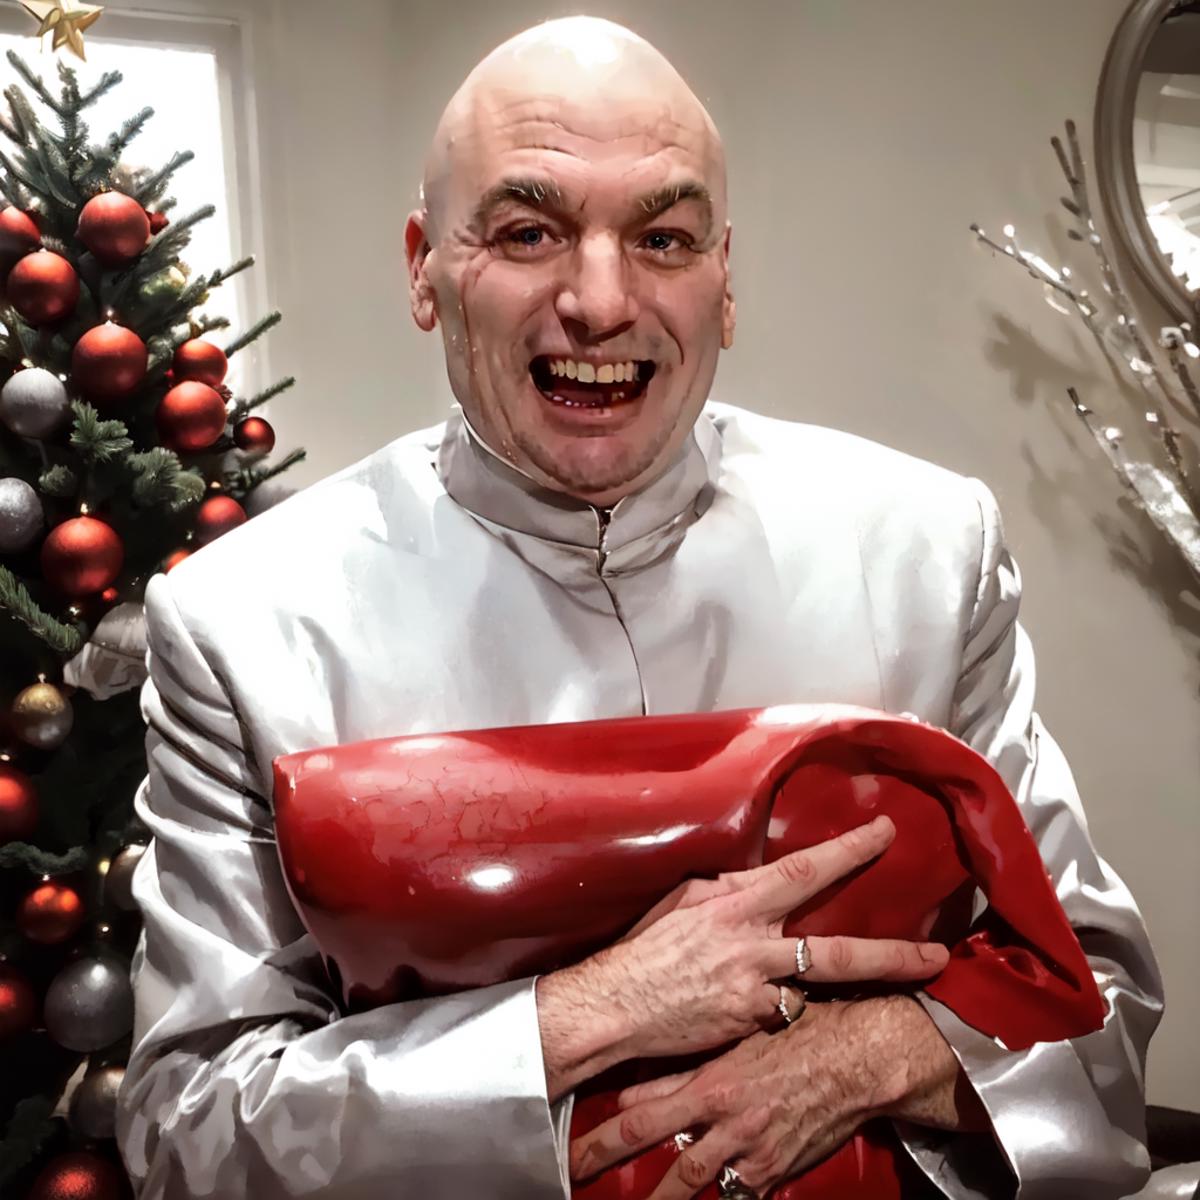 Dr. Evil from Austin Powers (Mike Myers) image by Bloodysunkist